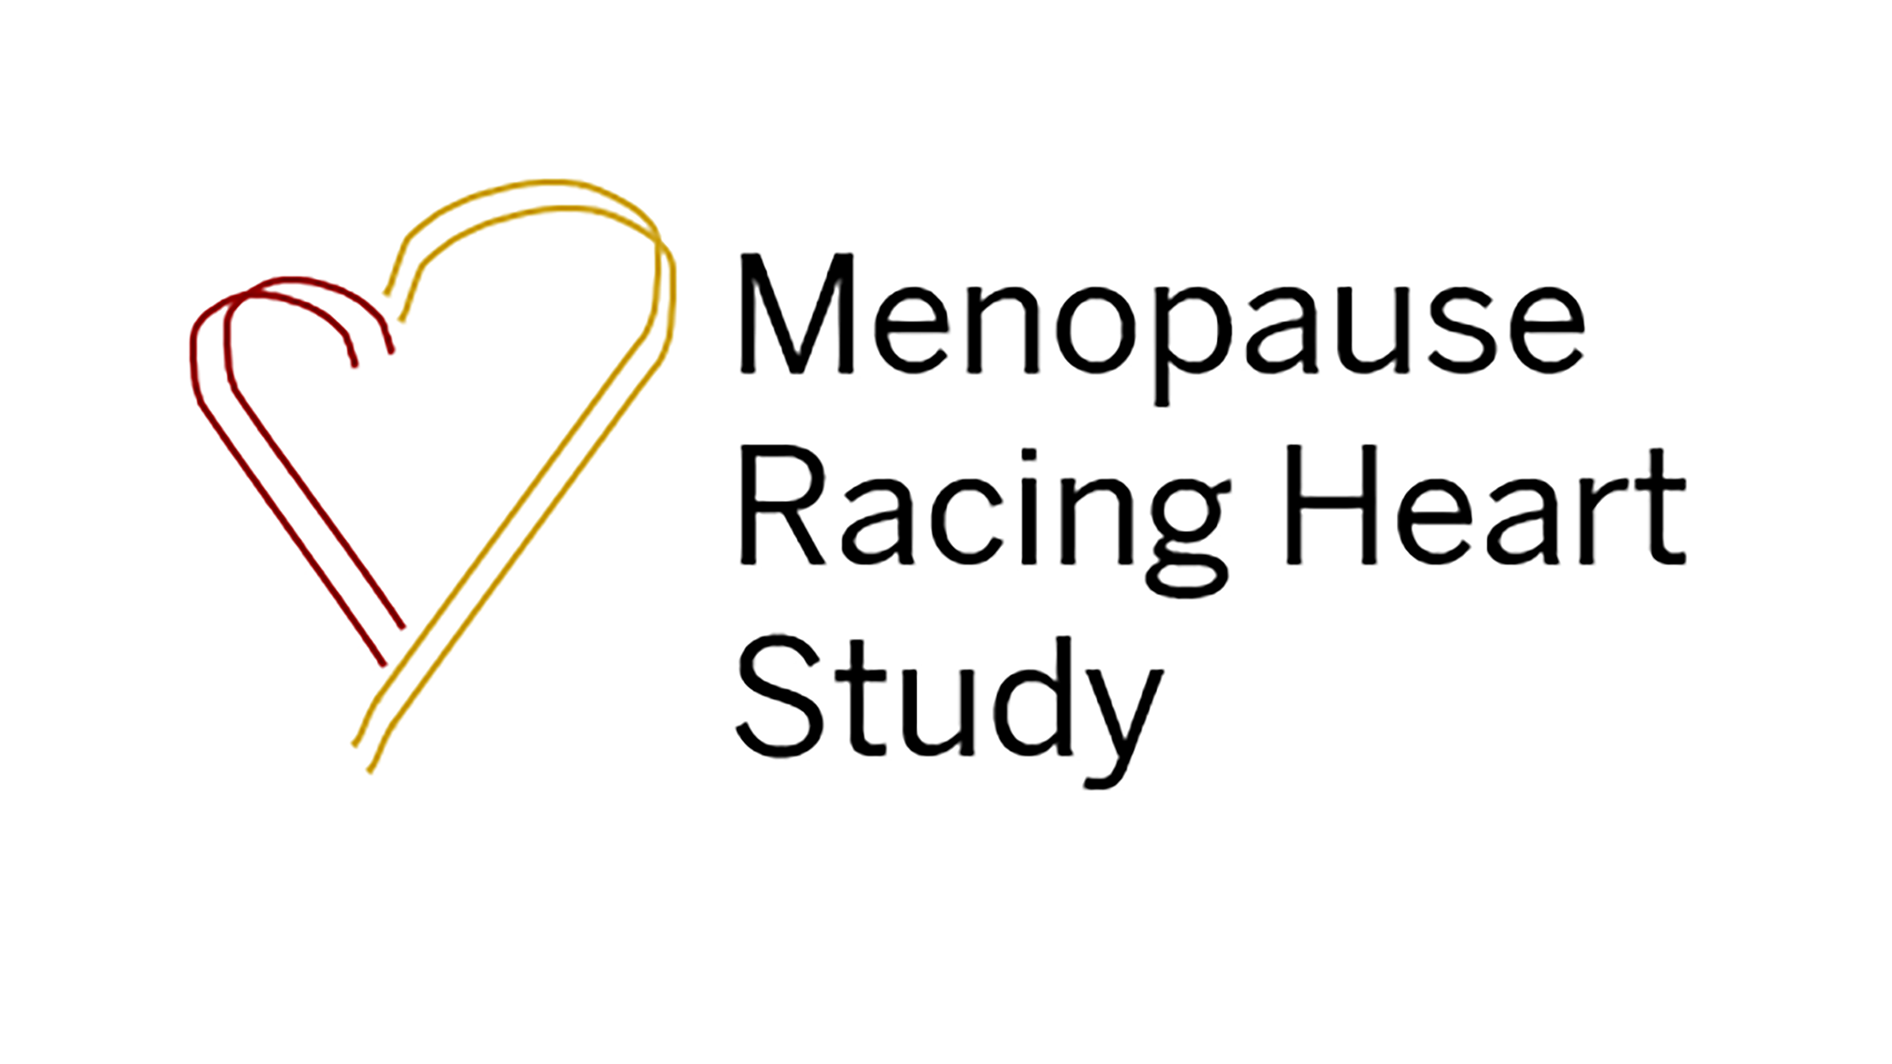 WOMEN NEEDED FOR THE MENOPAUSE RACING HEART STUDY